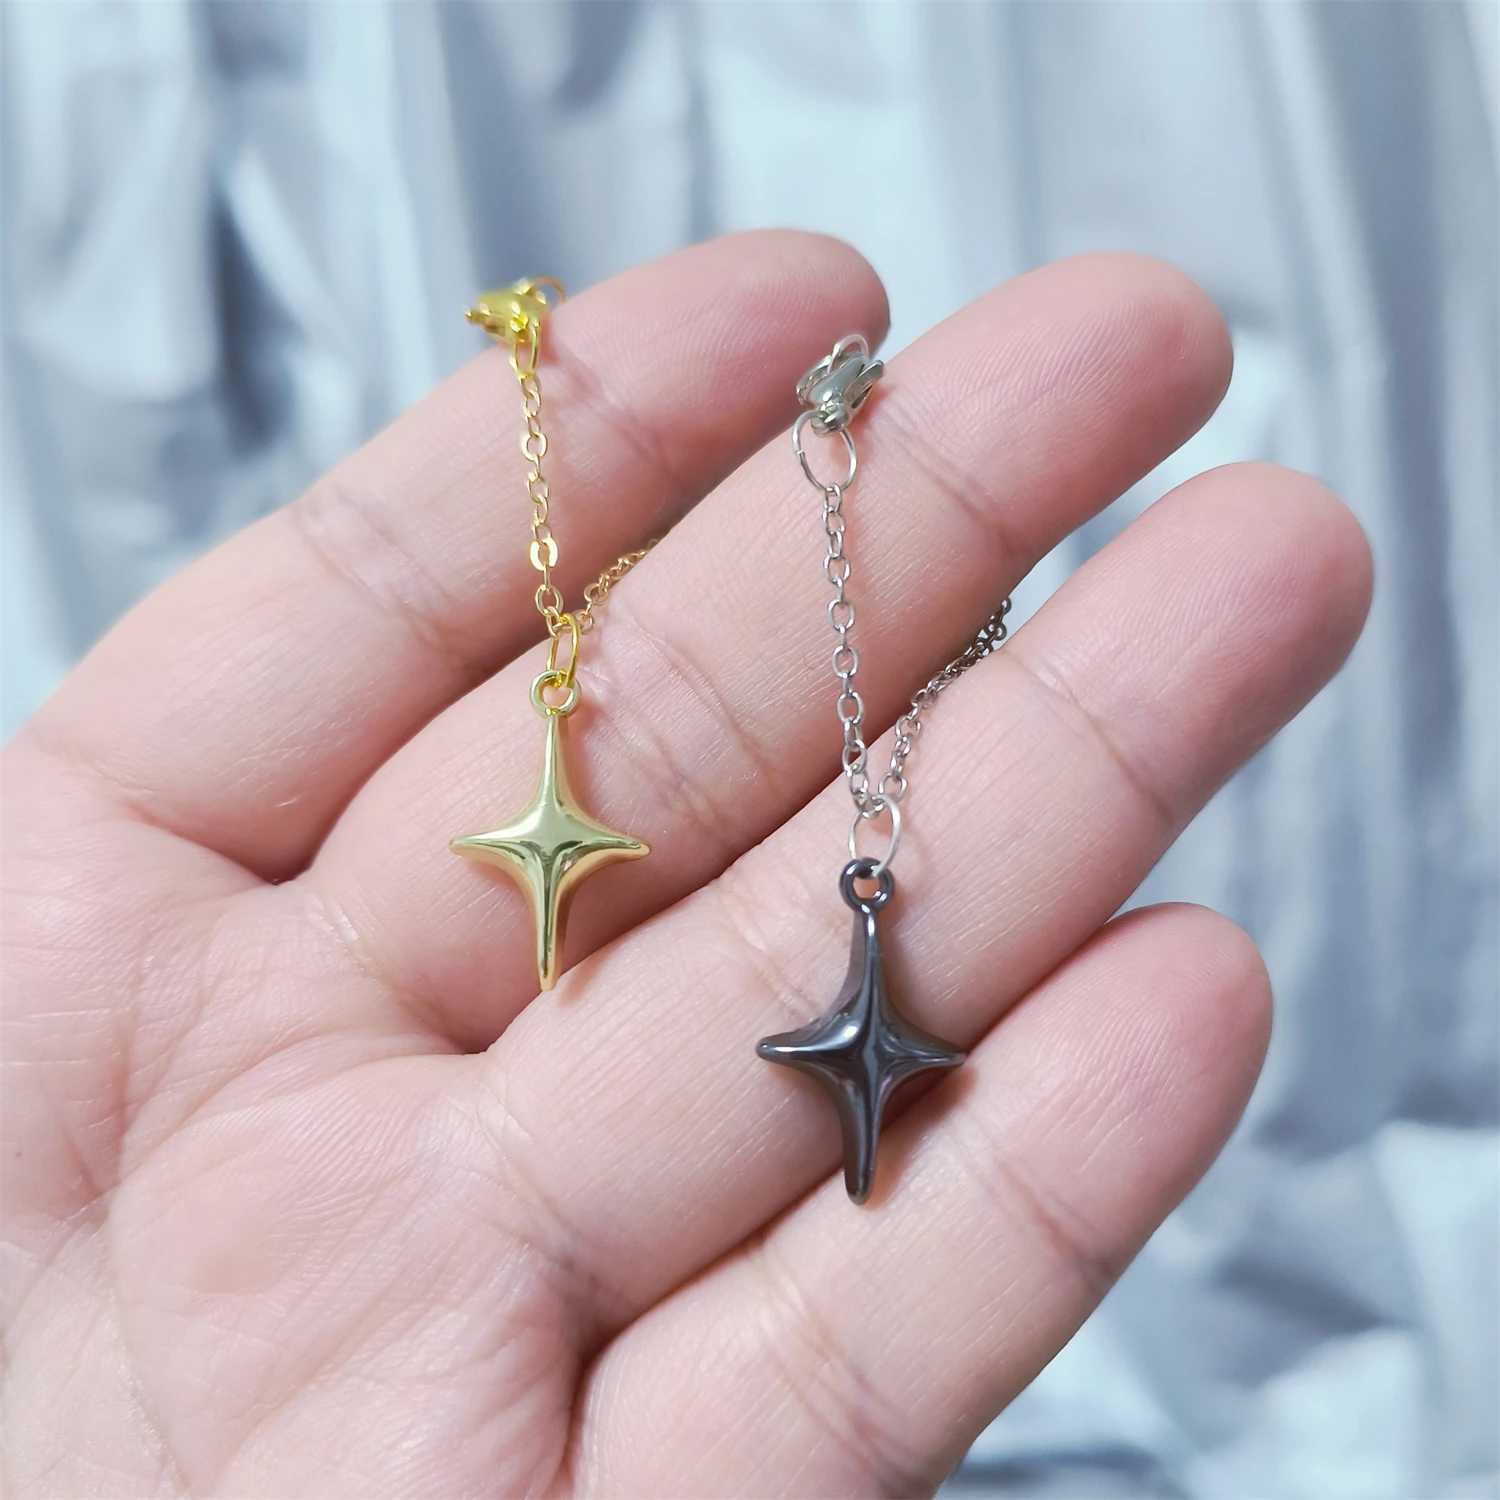 For BJD 1/6 Scale Blyth OB Doll Size Simulation Big Star Necklace Mini Tiny Accessories Decoration Alloy Prop Fashion new norrev 3 inches 1 64 scale c4 2020 diecast alloy toy car for collection gift